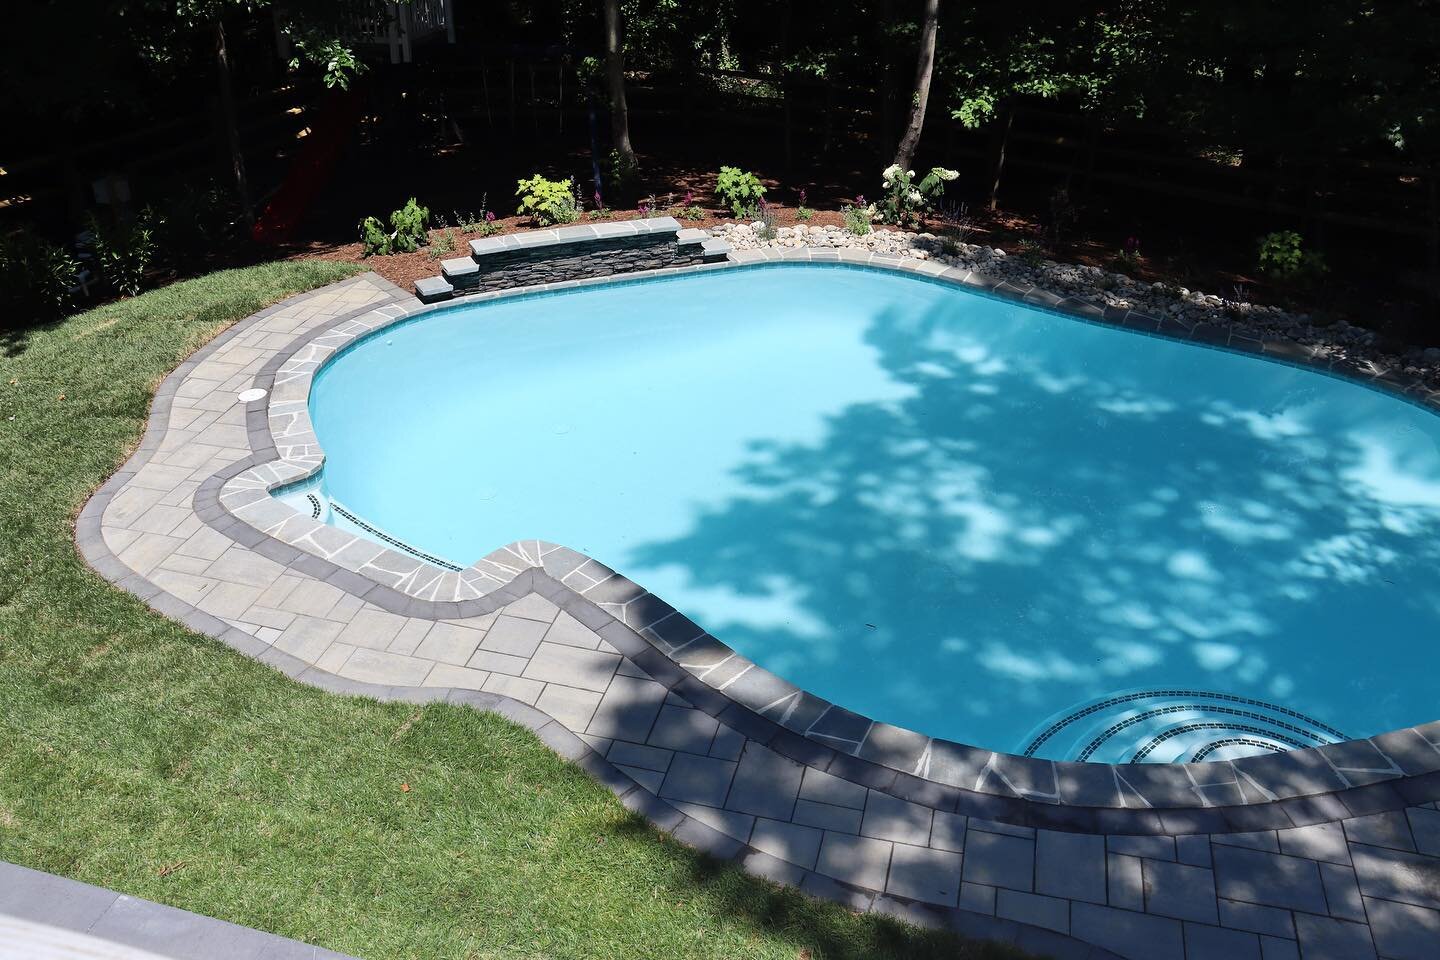 Miss out on all the pool fun this summer? Don&rsquo;t miss out next year!! 

Give us a call today and book a free consultation with out pool specialist Danny (443) 926 1442

#marylandpoolbuilders #marylandpools #poolbuilder